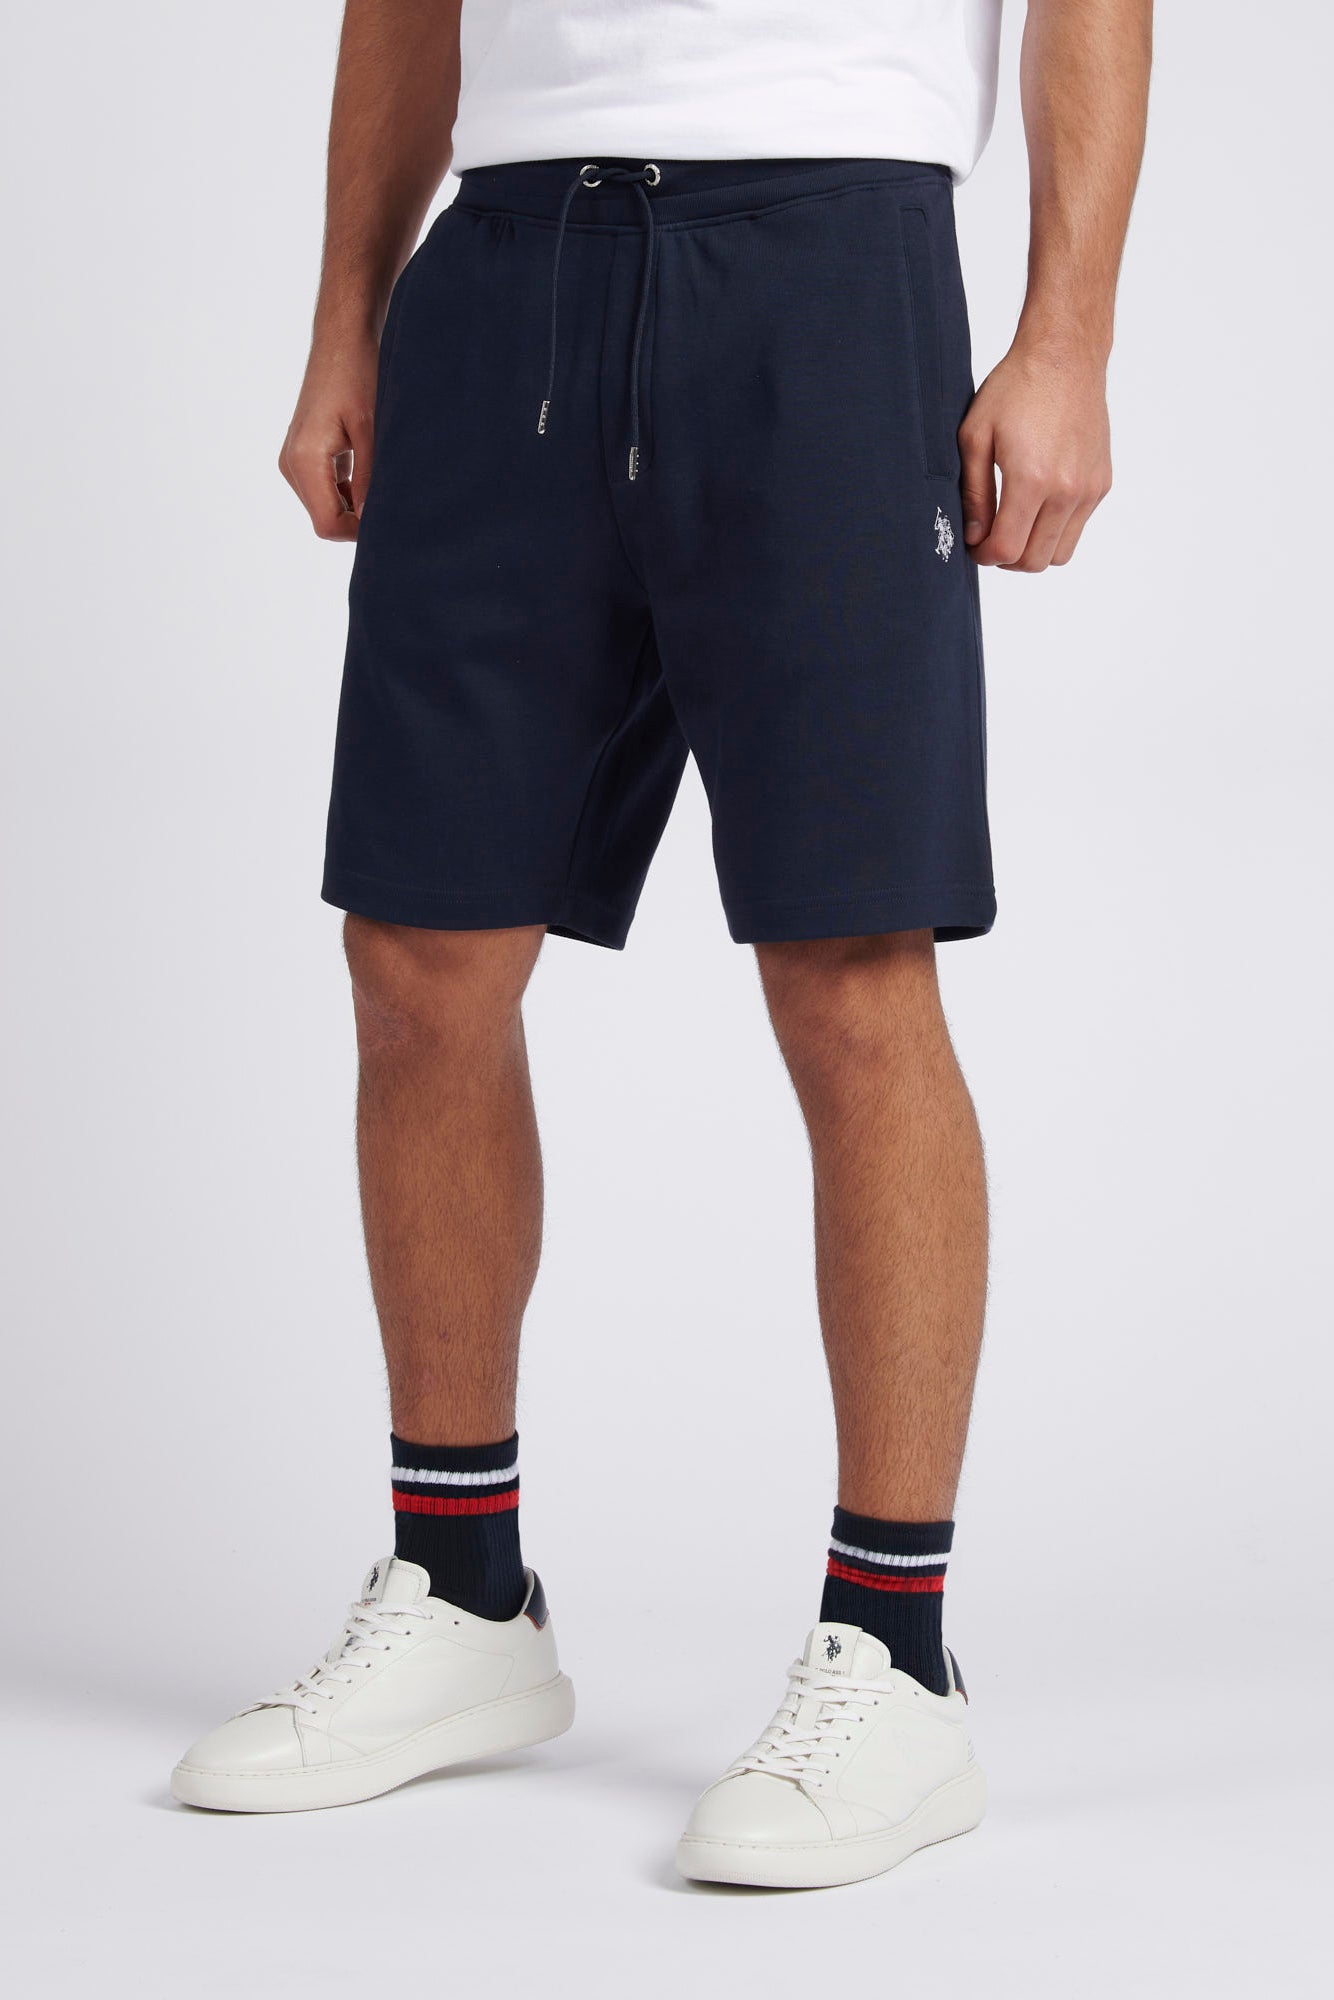 Mens Classic Fit Luxe Sweat Shorts in Dark Sapphire Navy / White DHM